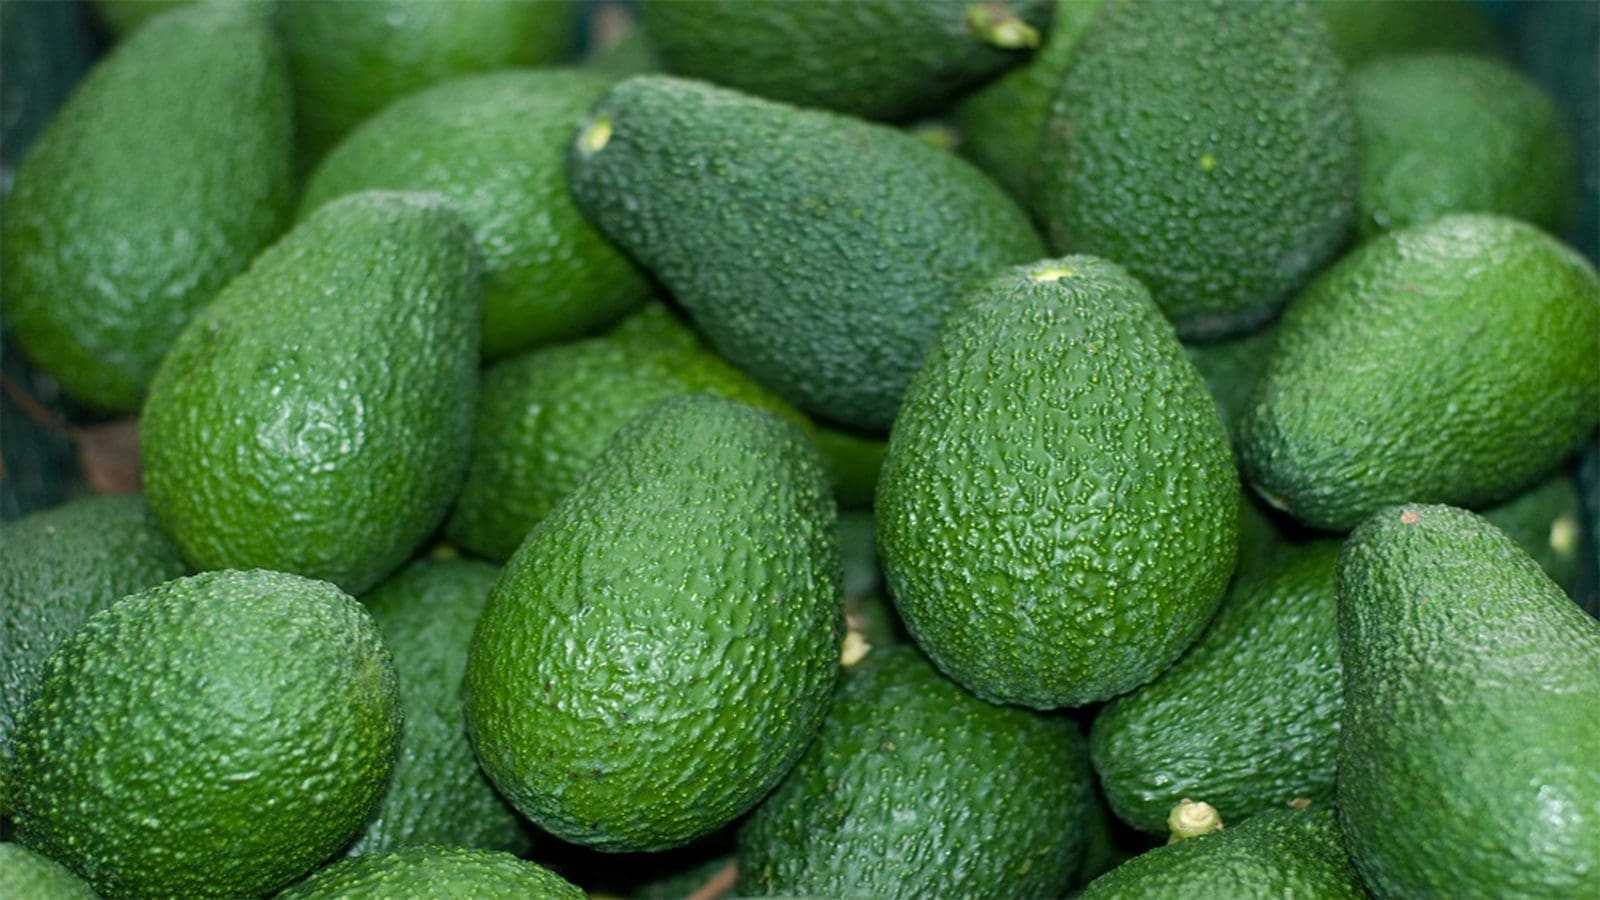 Agriculture and Food Authority Kenya imposes stricter avocado maturity indices to safeguard export market